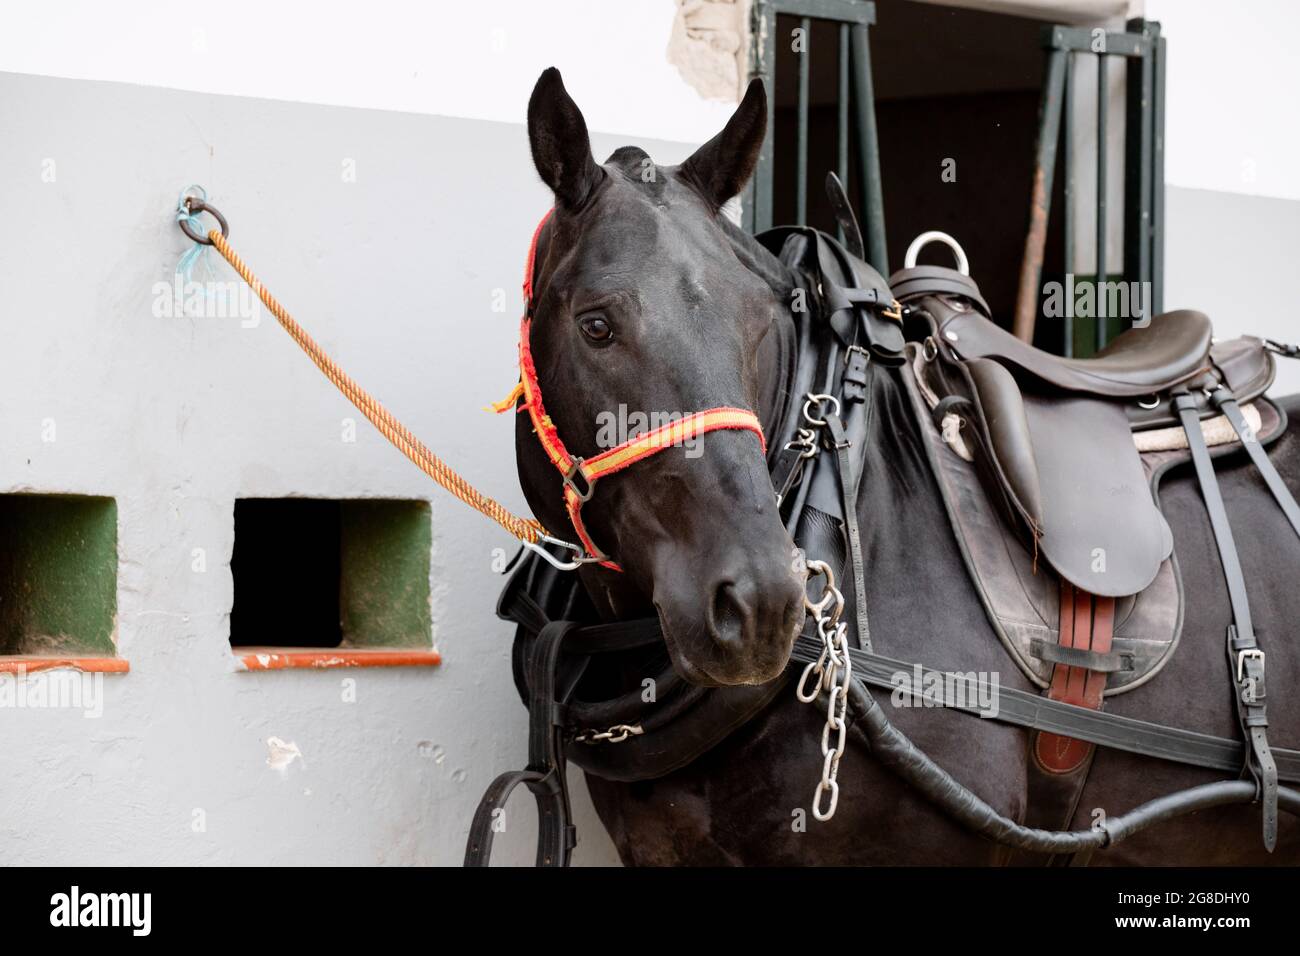 Face portrait of a black breton horse with harness, saddle and bridle Stock Photo